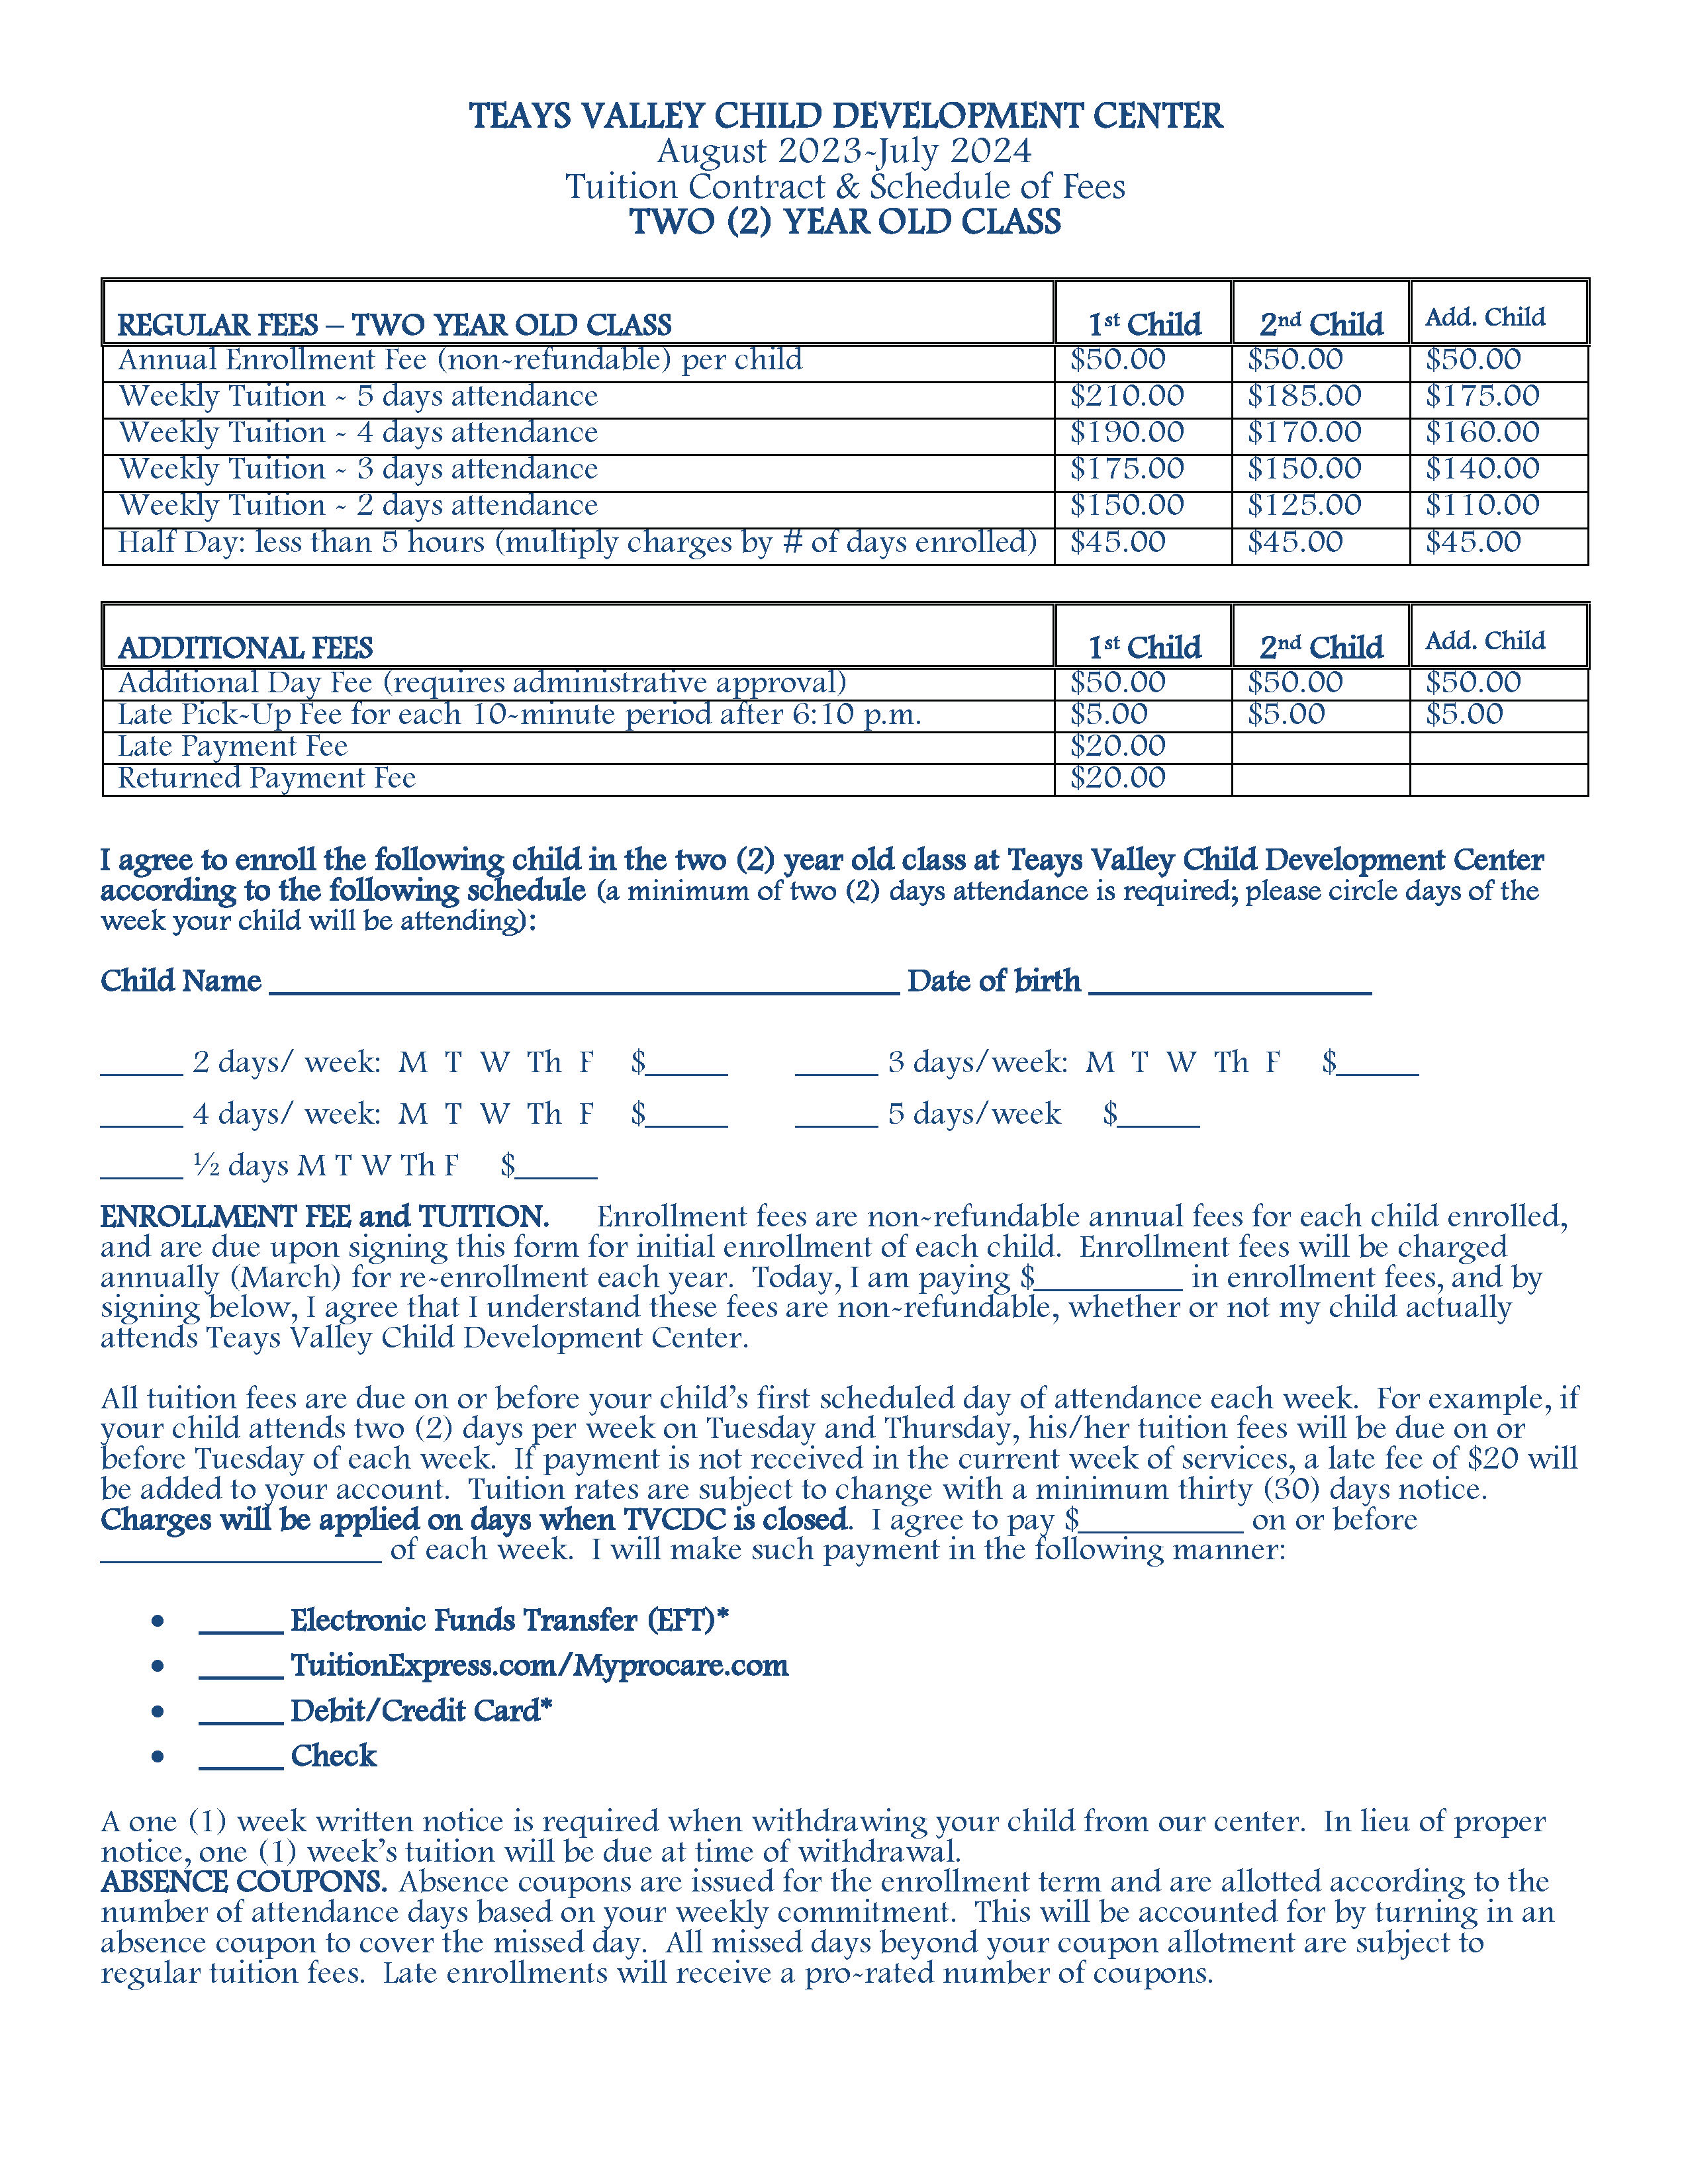 Two Year Old Pay Agreement Page 1